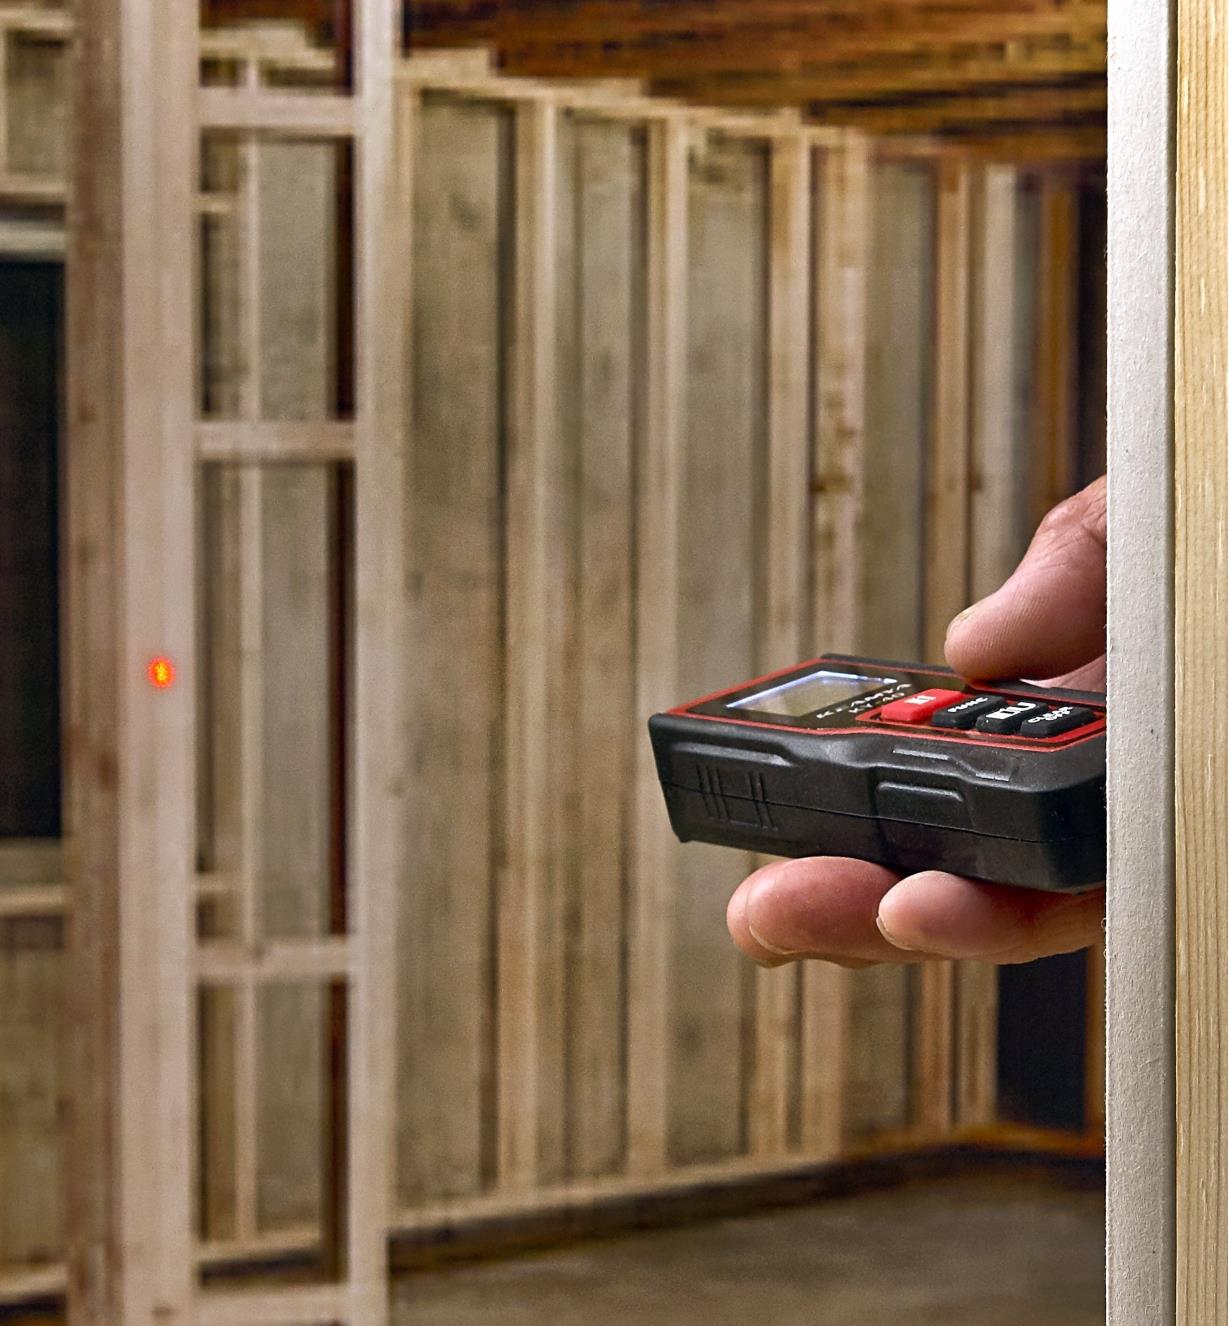 A pocket laser measure is being used to measure the distance between two walls